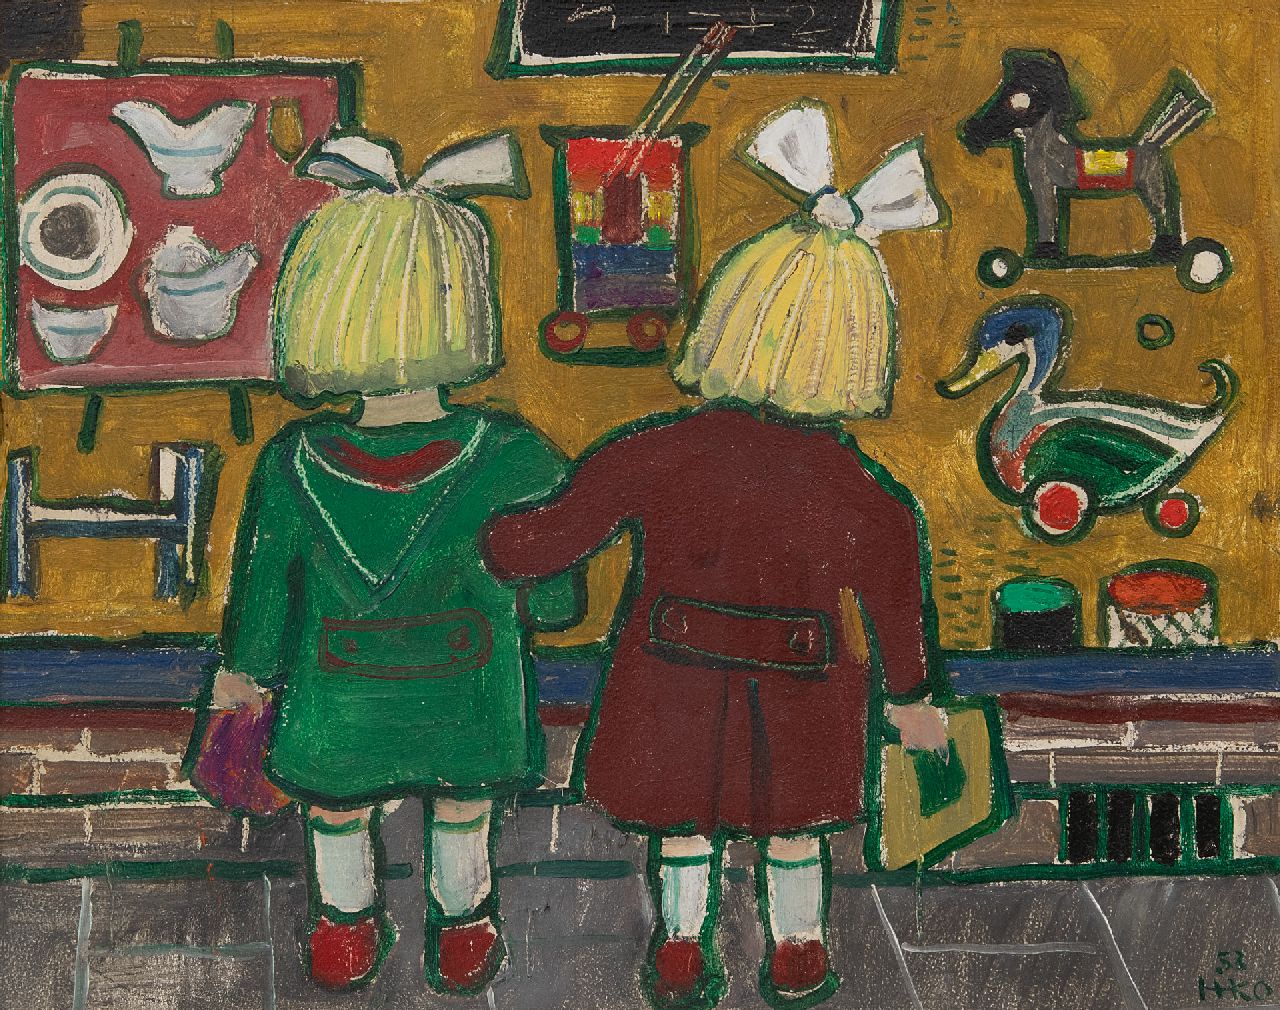 Kamerlingh Onnes H.H.  | 'Harm' Henrick Kamerlingh Onnes, Children in front of the window of a toyshop, oil on board 23.7 x 29.7 cm, signed l.r. with monogram and dated '53